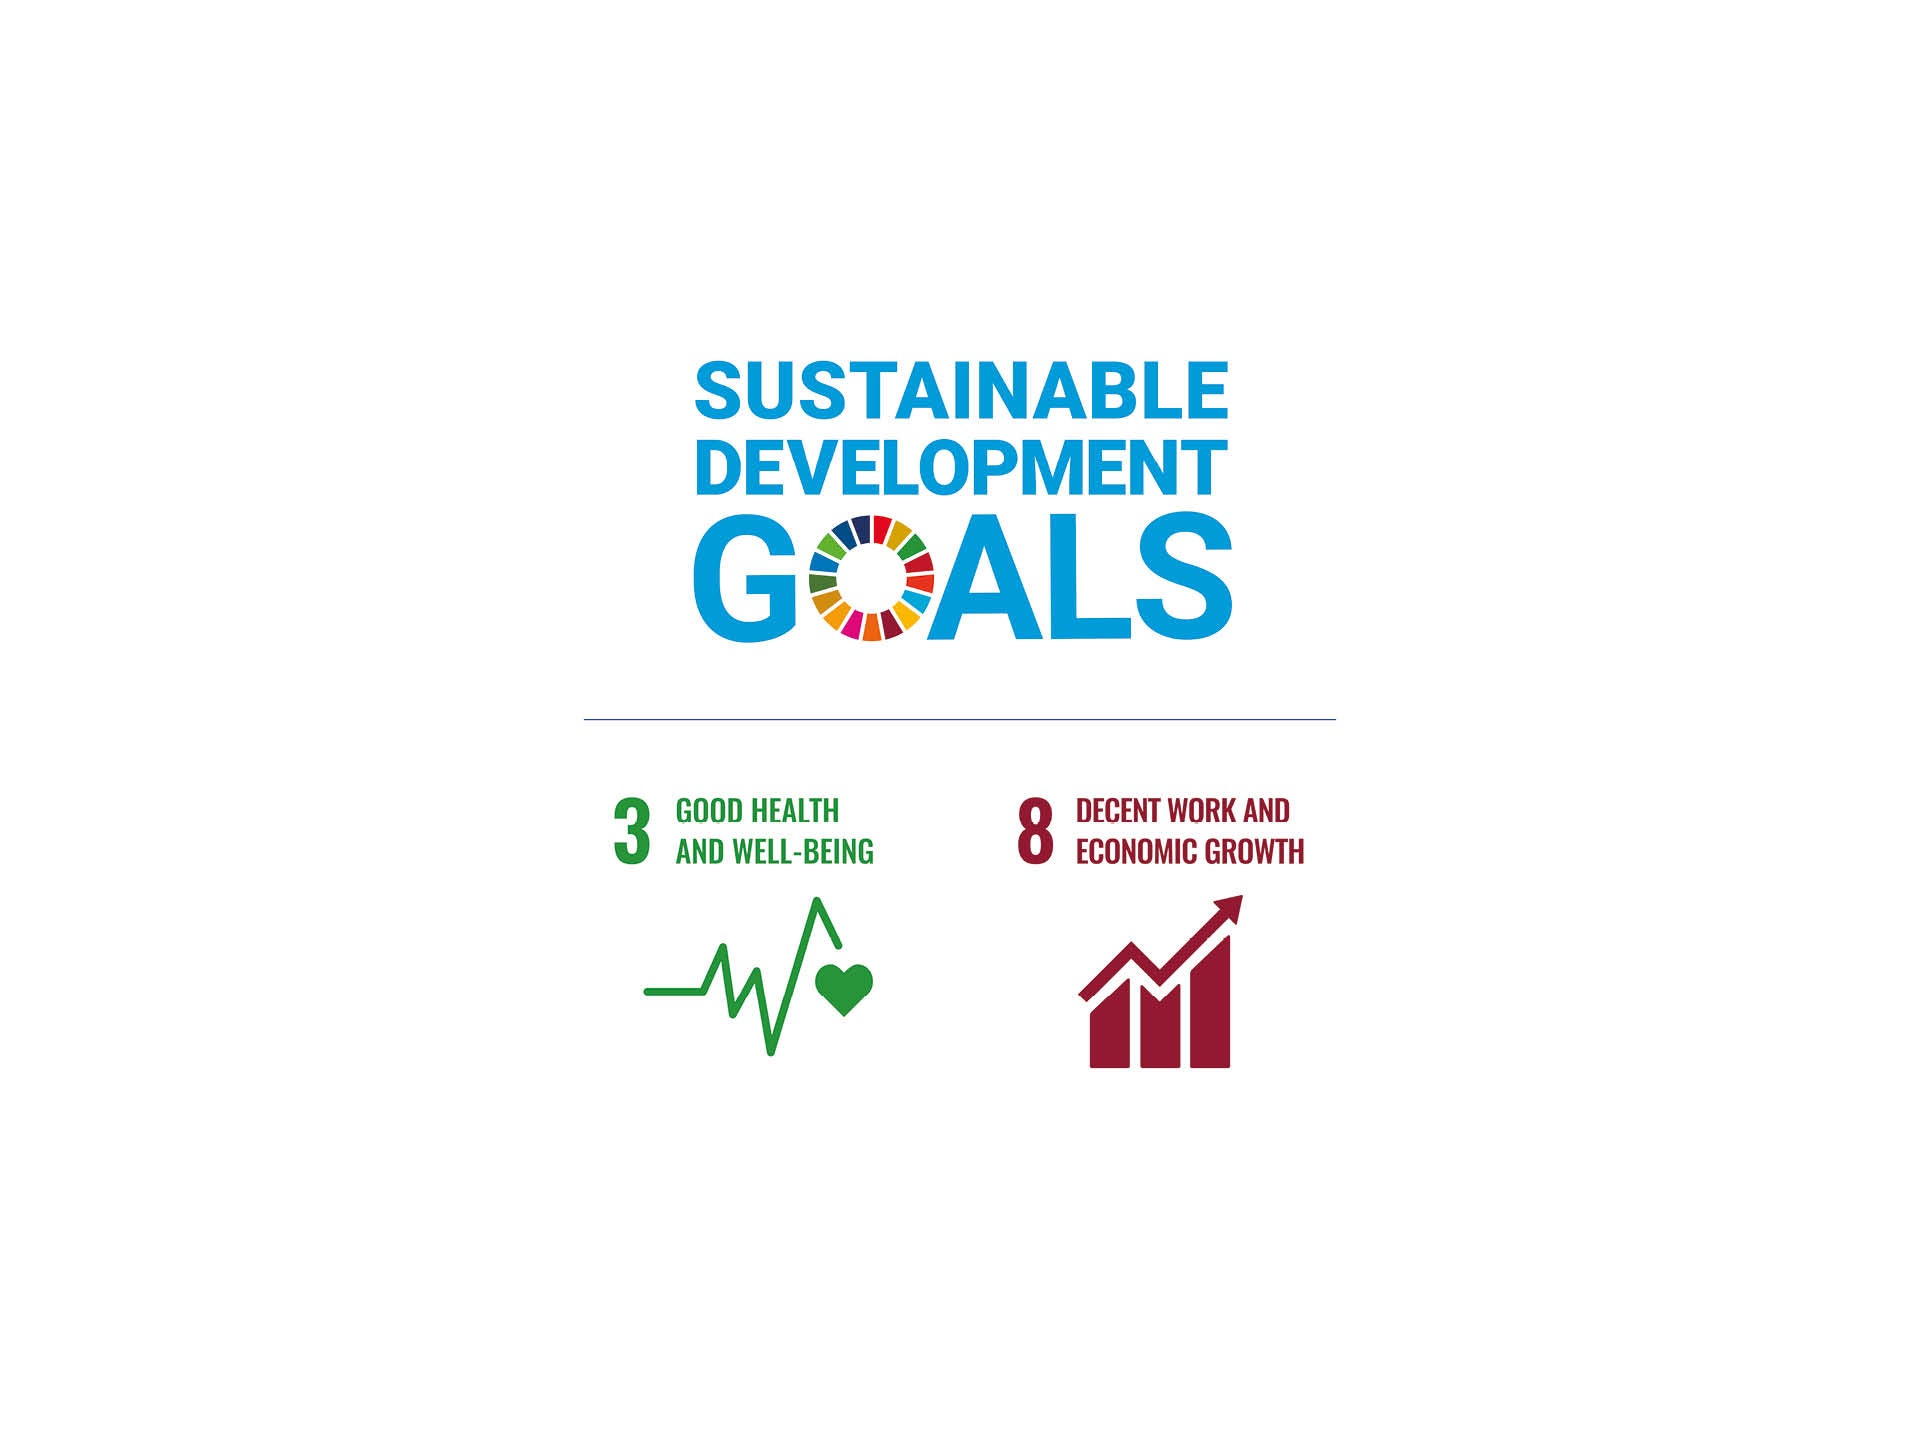 Sustainability goal 3 and 8